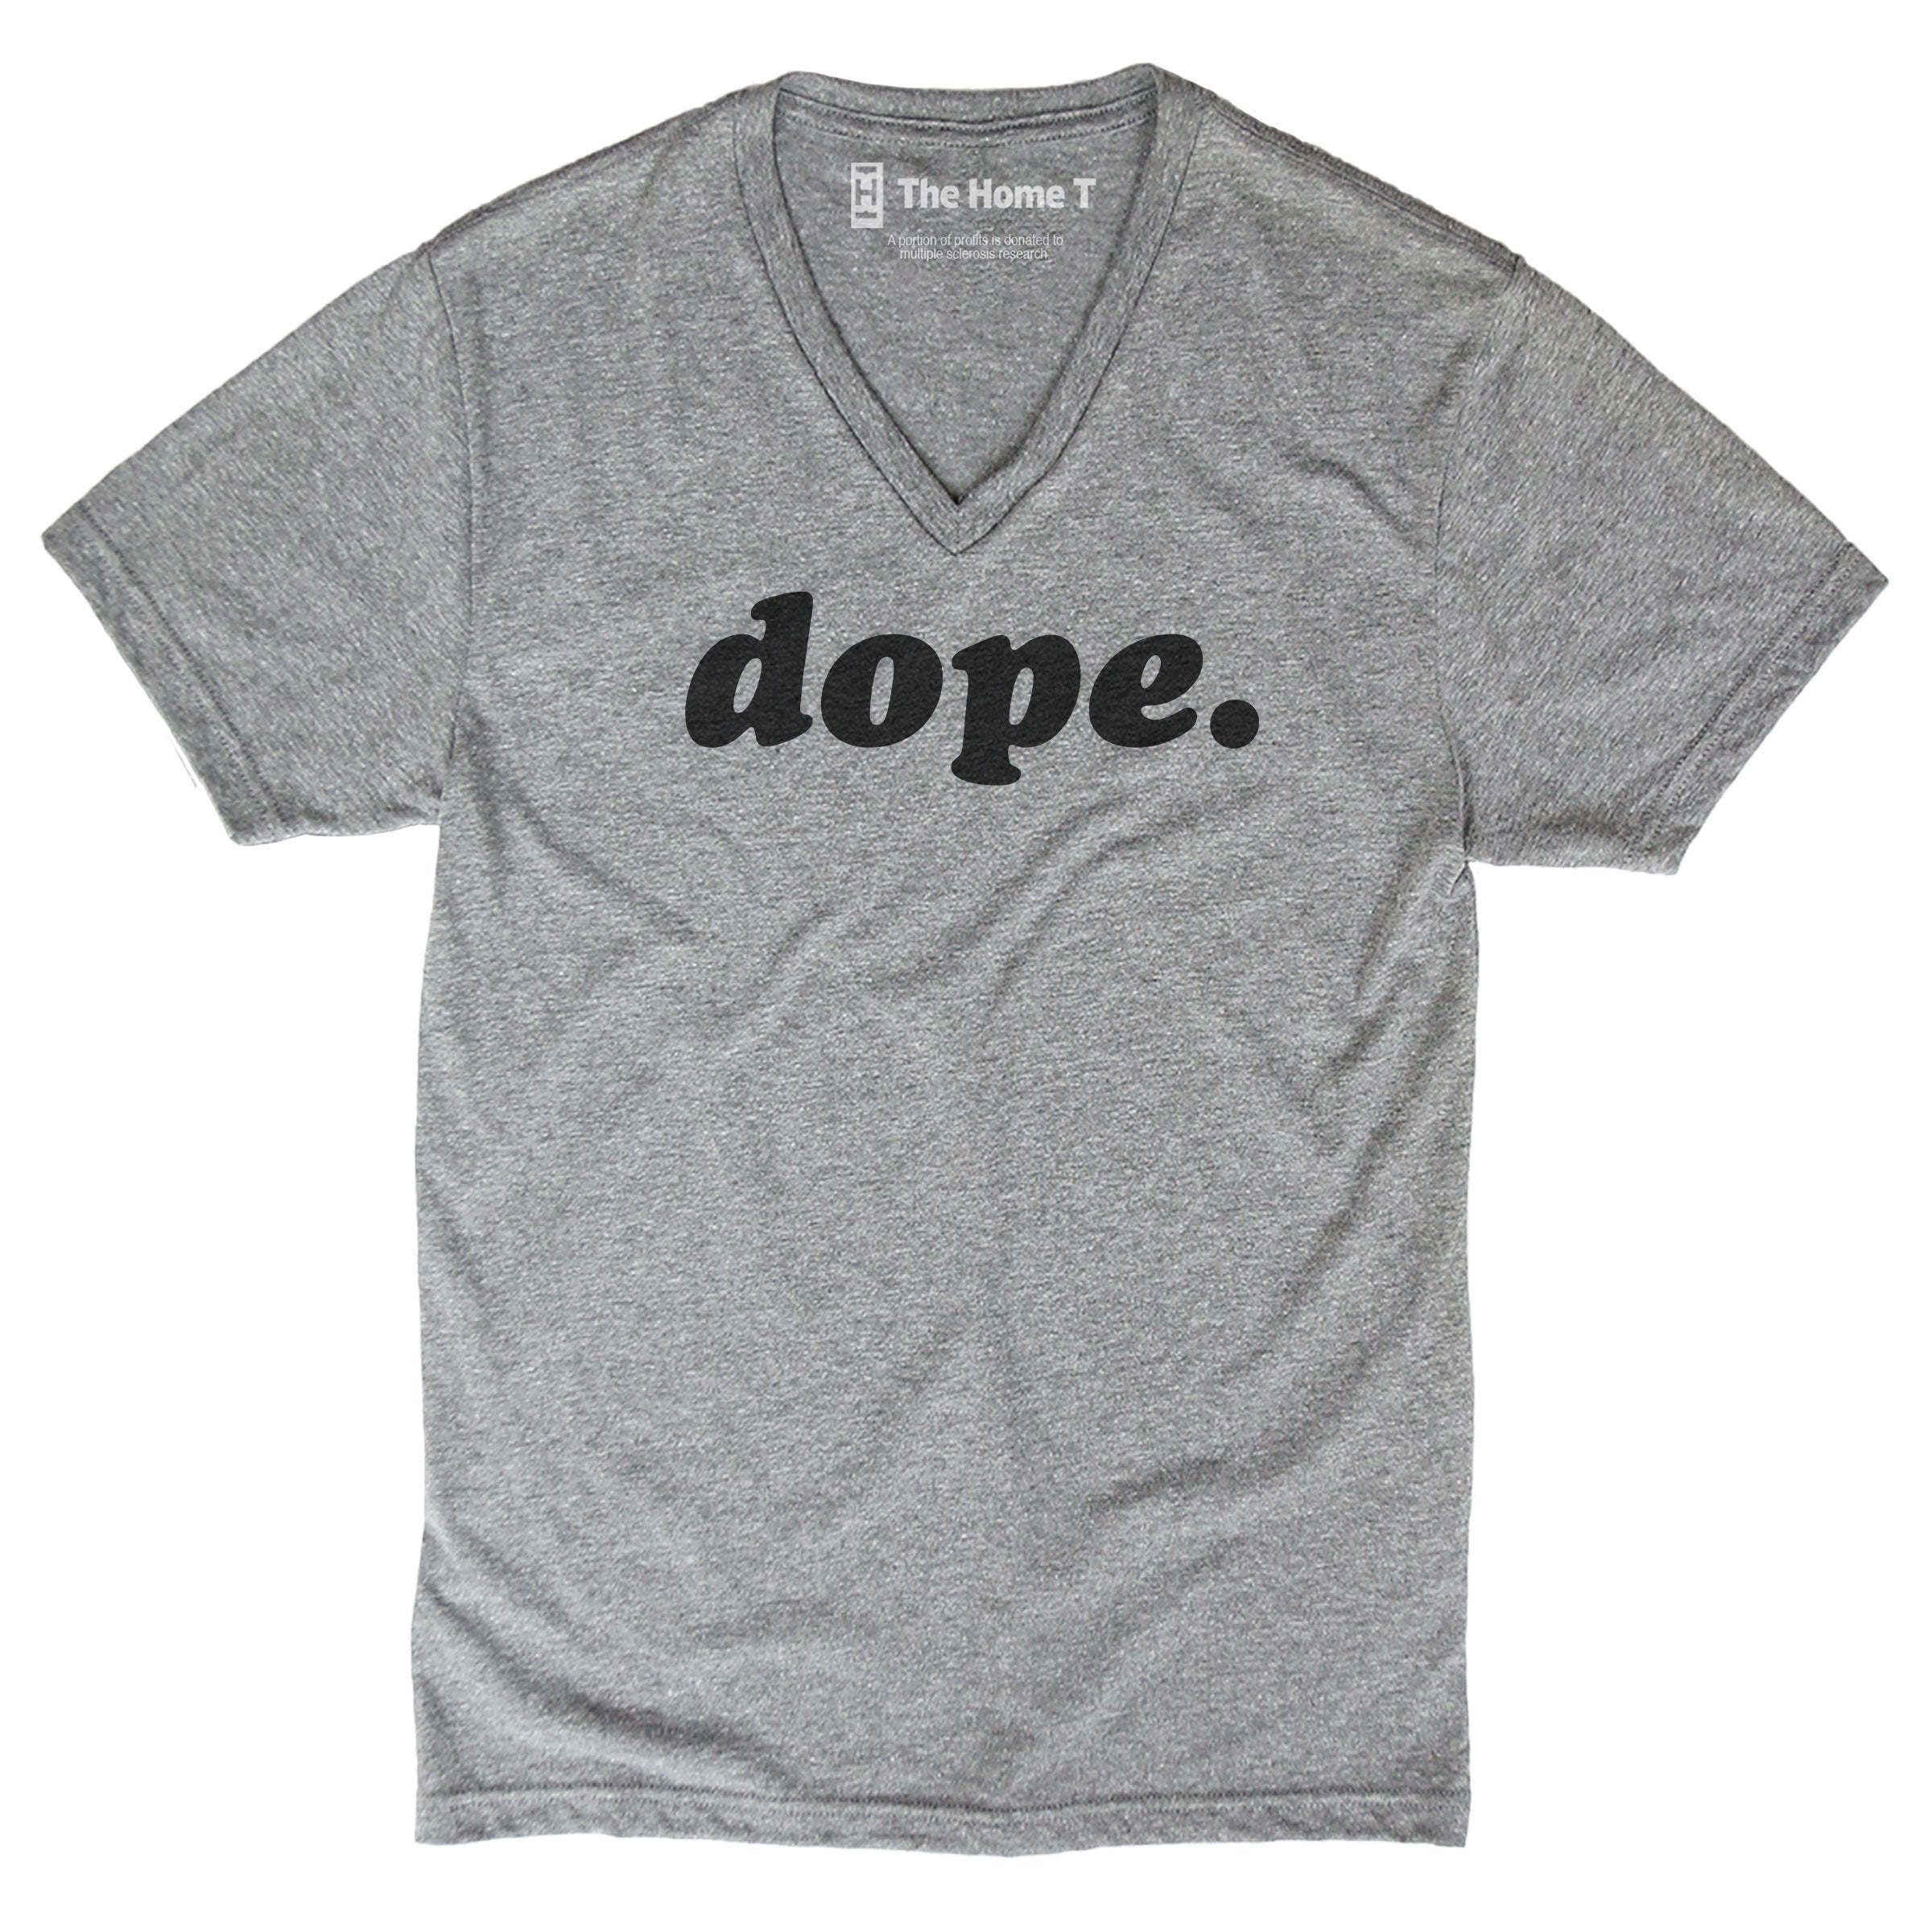 Dope. The Home T XS V NECK